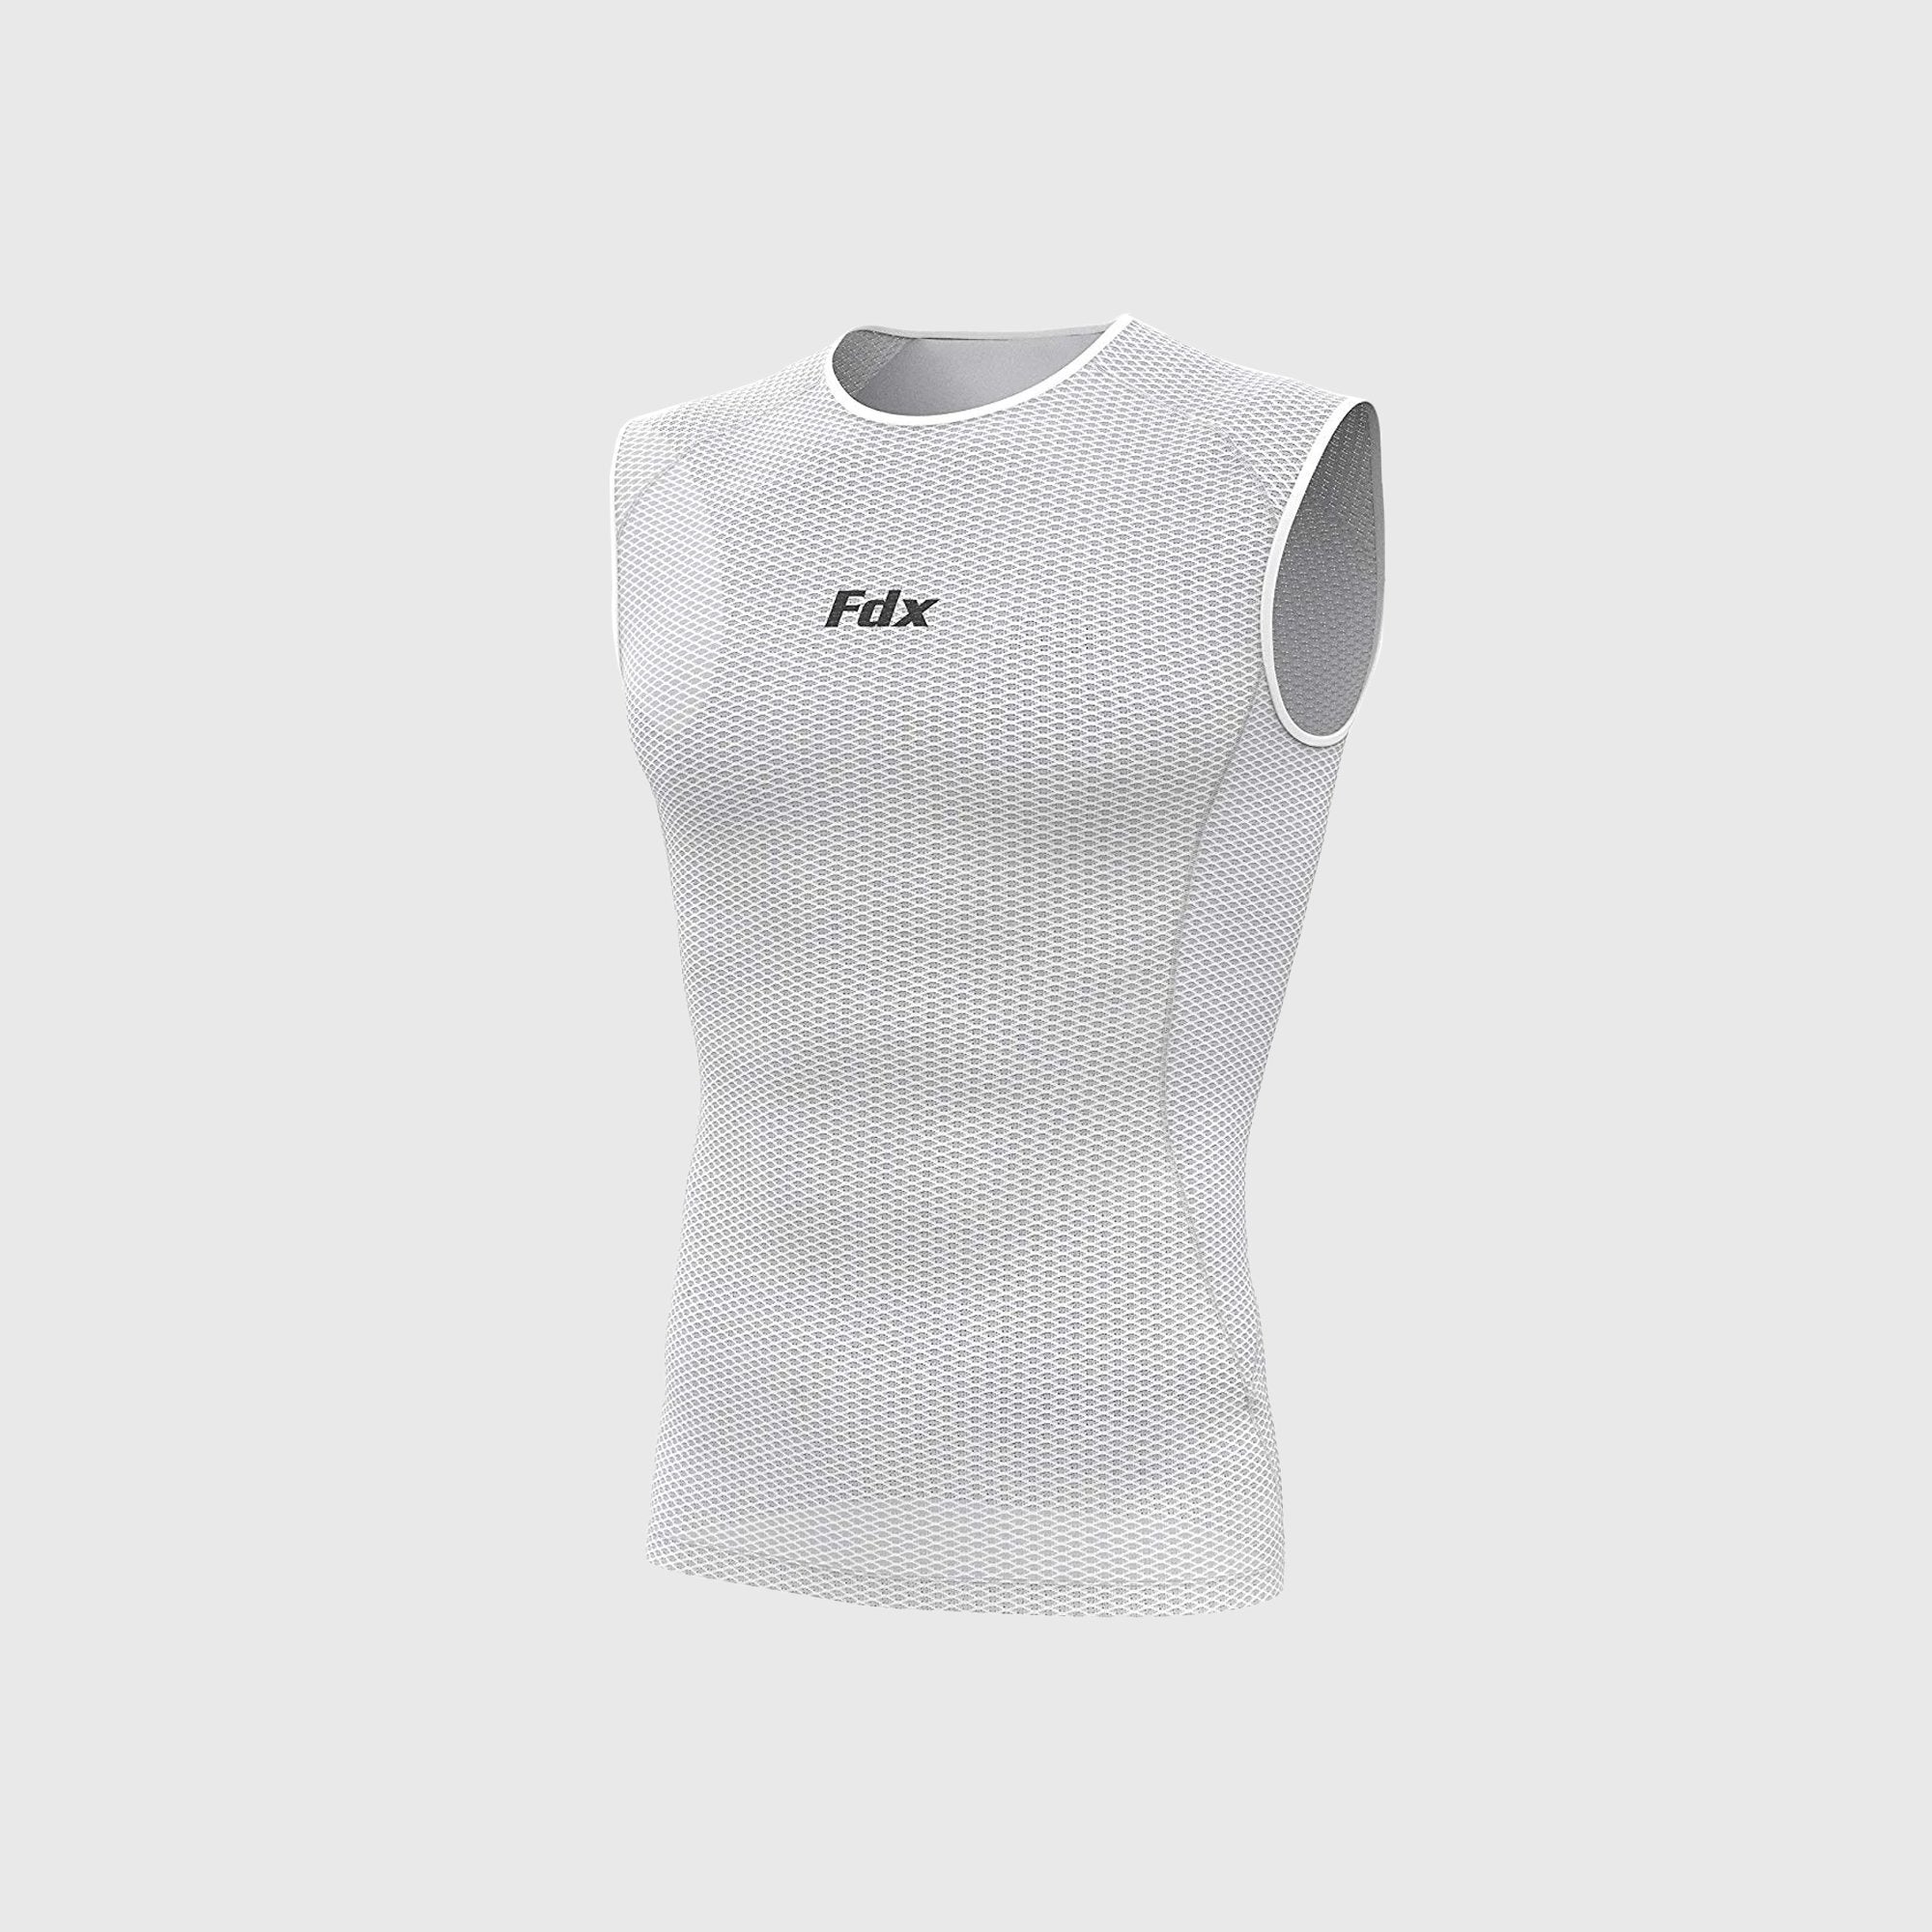 Fdx Men's White Sleeveless Mesh Compression Top Running Gym Workout Wear Rash Guard Stretchable Breathable Lightweight - Aeroform